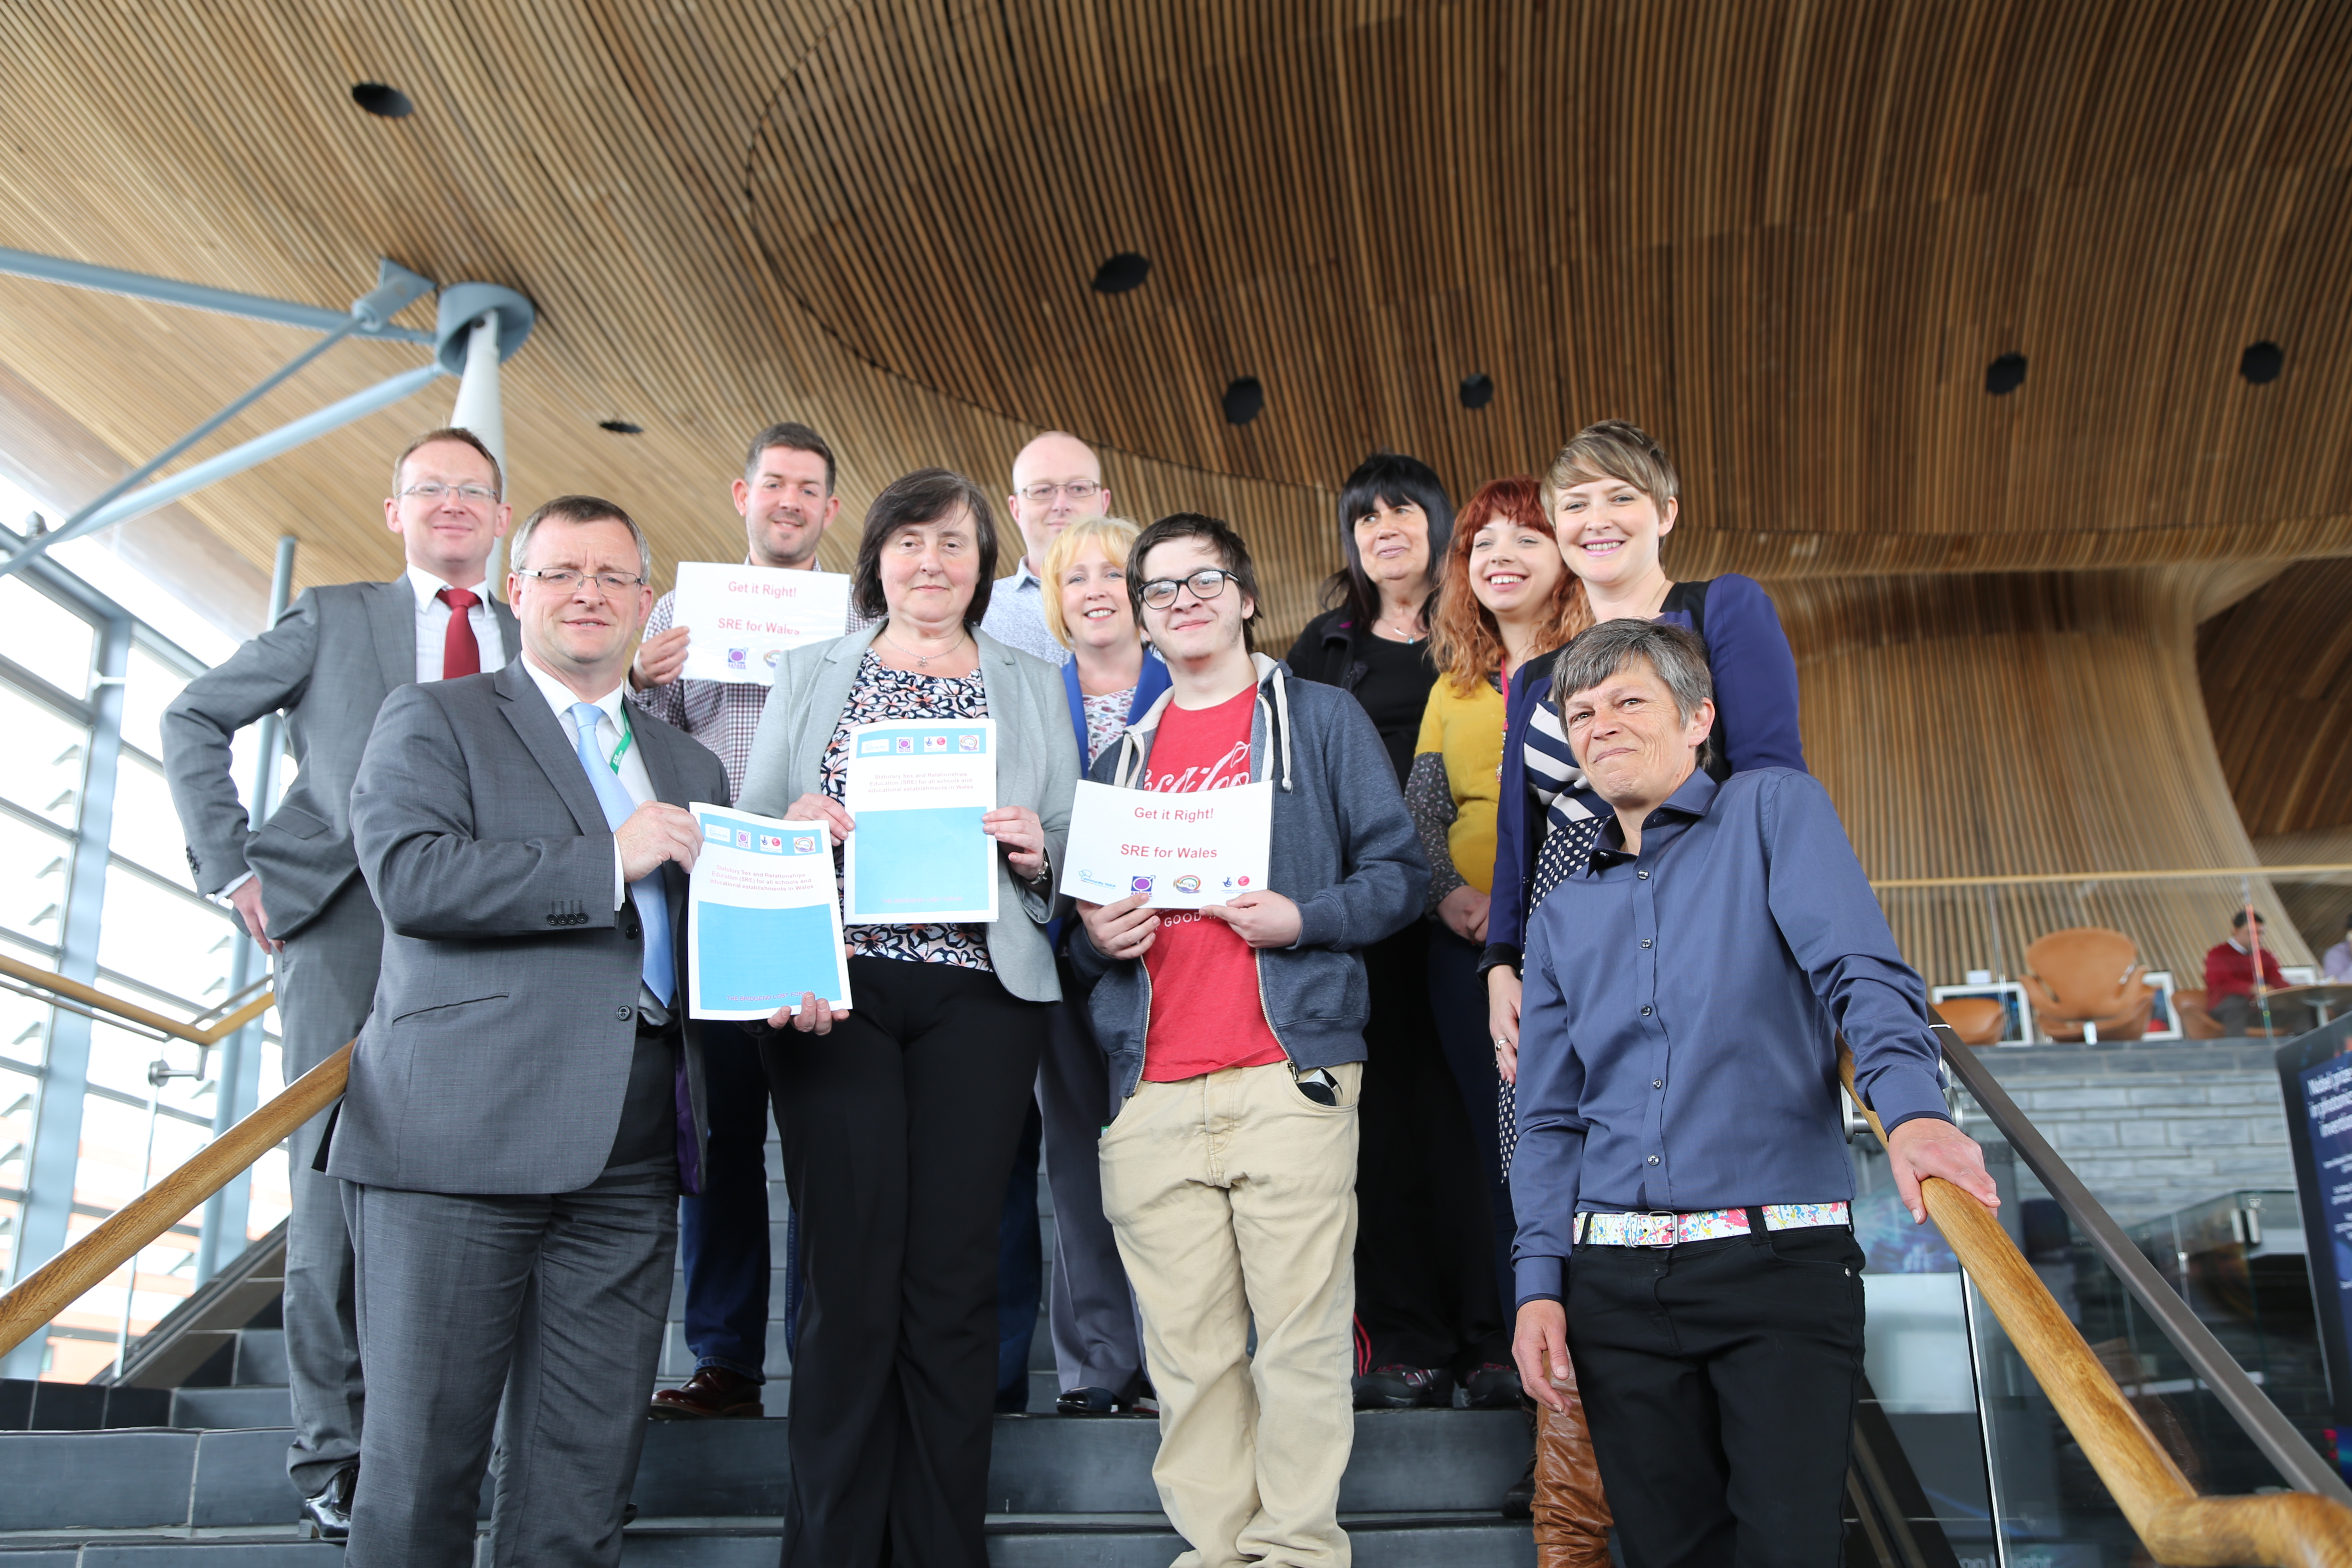 William Powell, Bethan Jenkins and Russell George AM accept the petition from petitioners on the steps of the Senedd